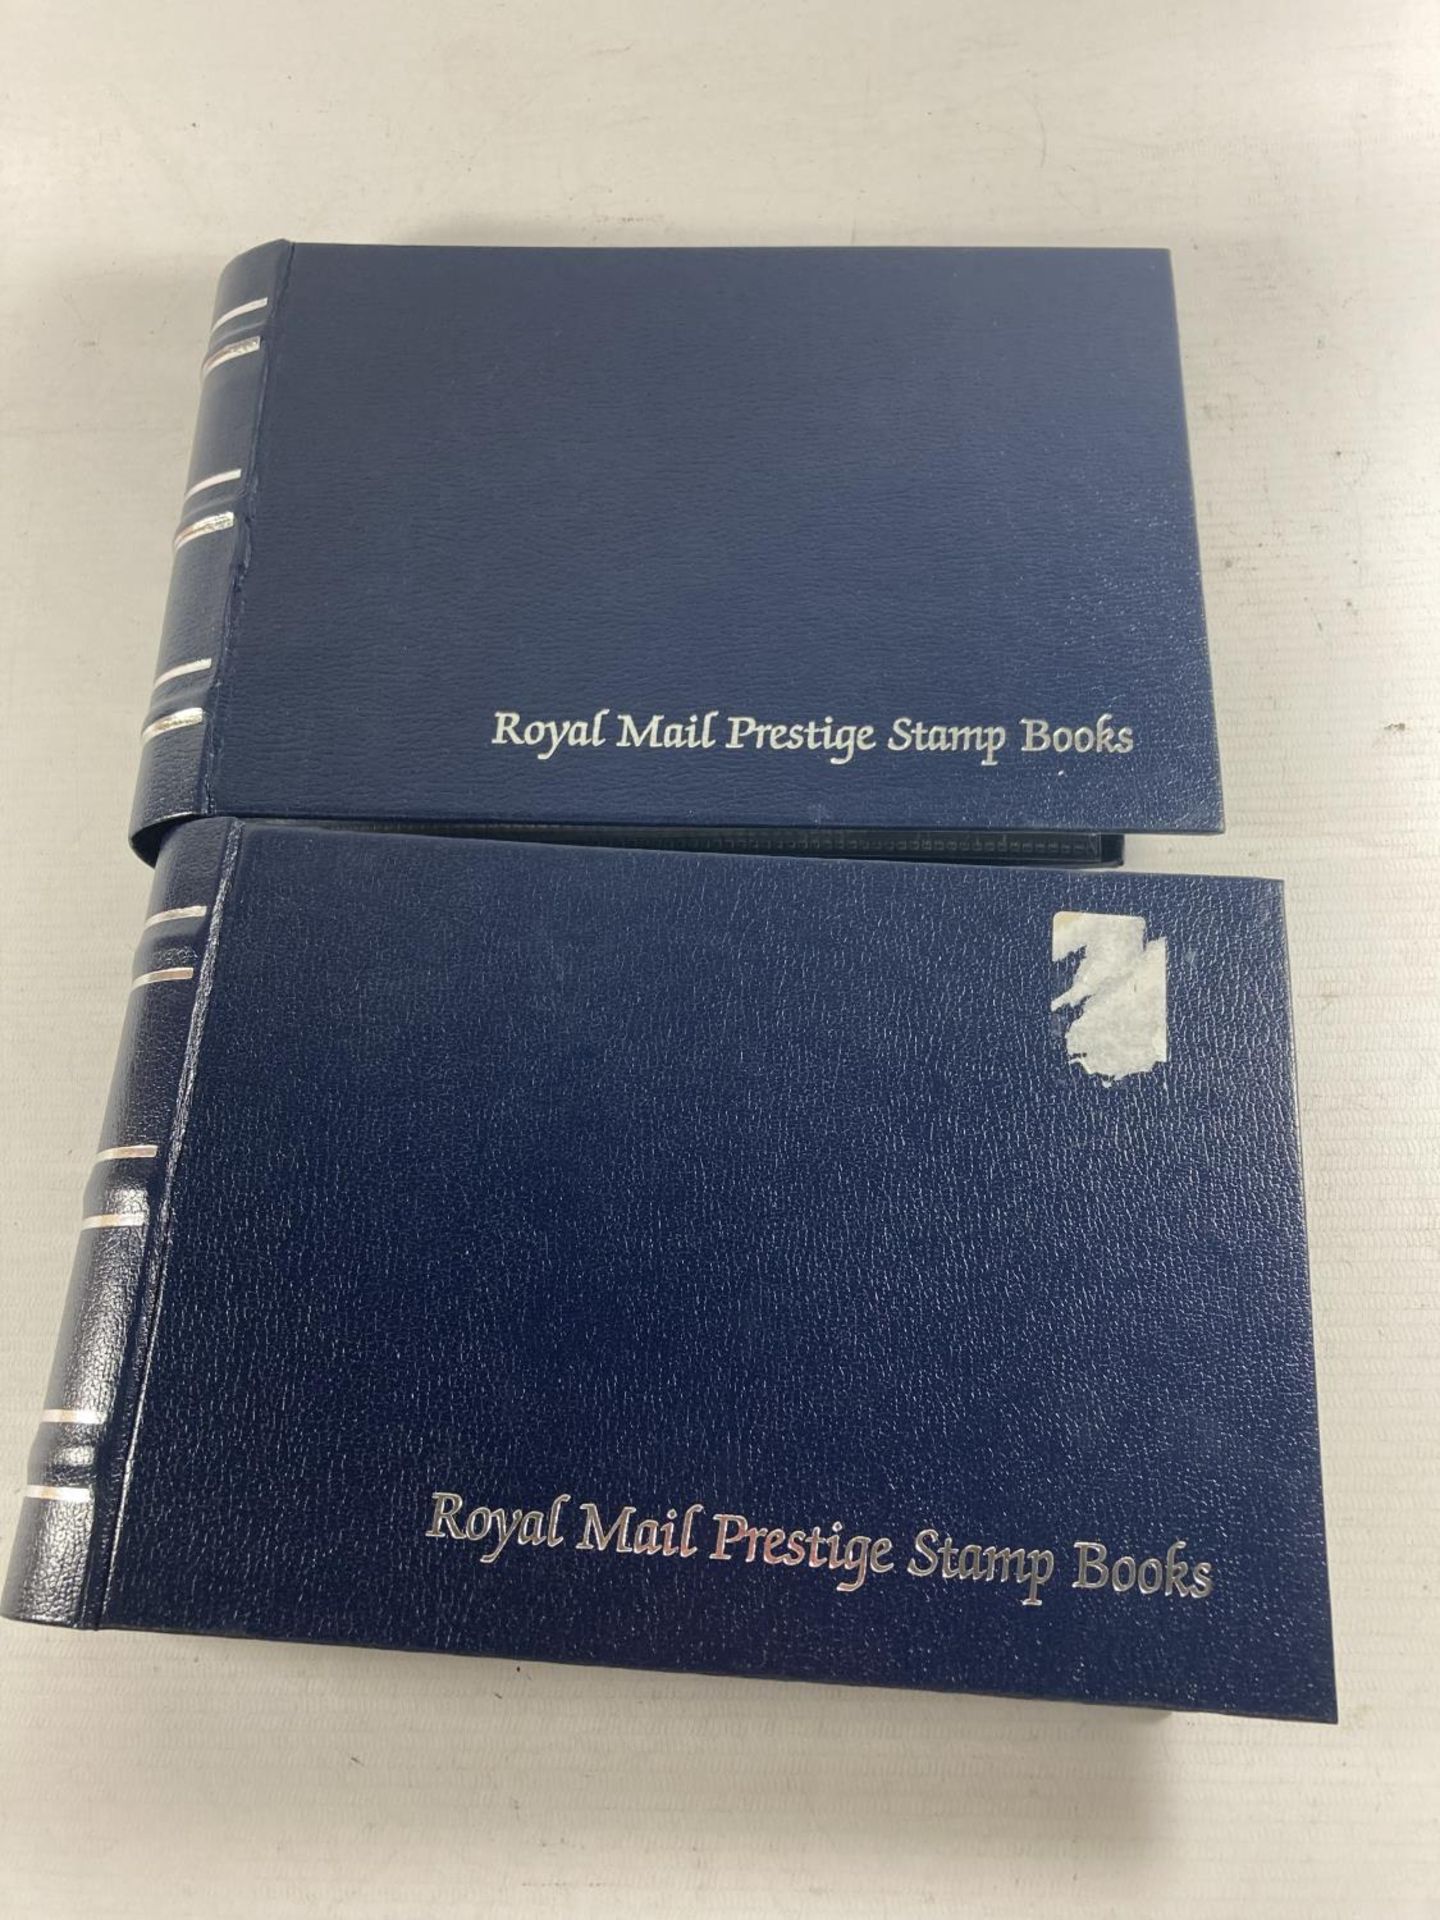 GB PRESTIGE BOOKLETS COLLECTION TO TWO BINDERS , DY3 _ DY23 , 2012-2017 . FACE VALUE £282.63